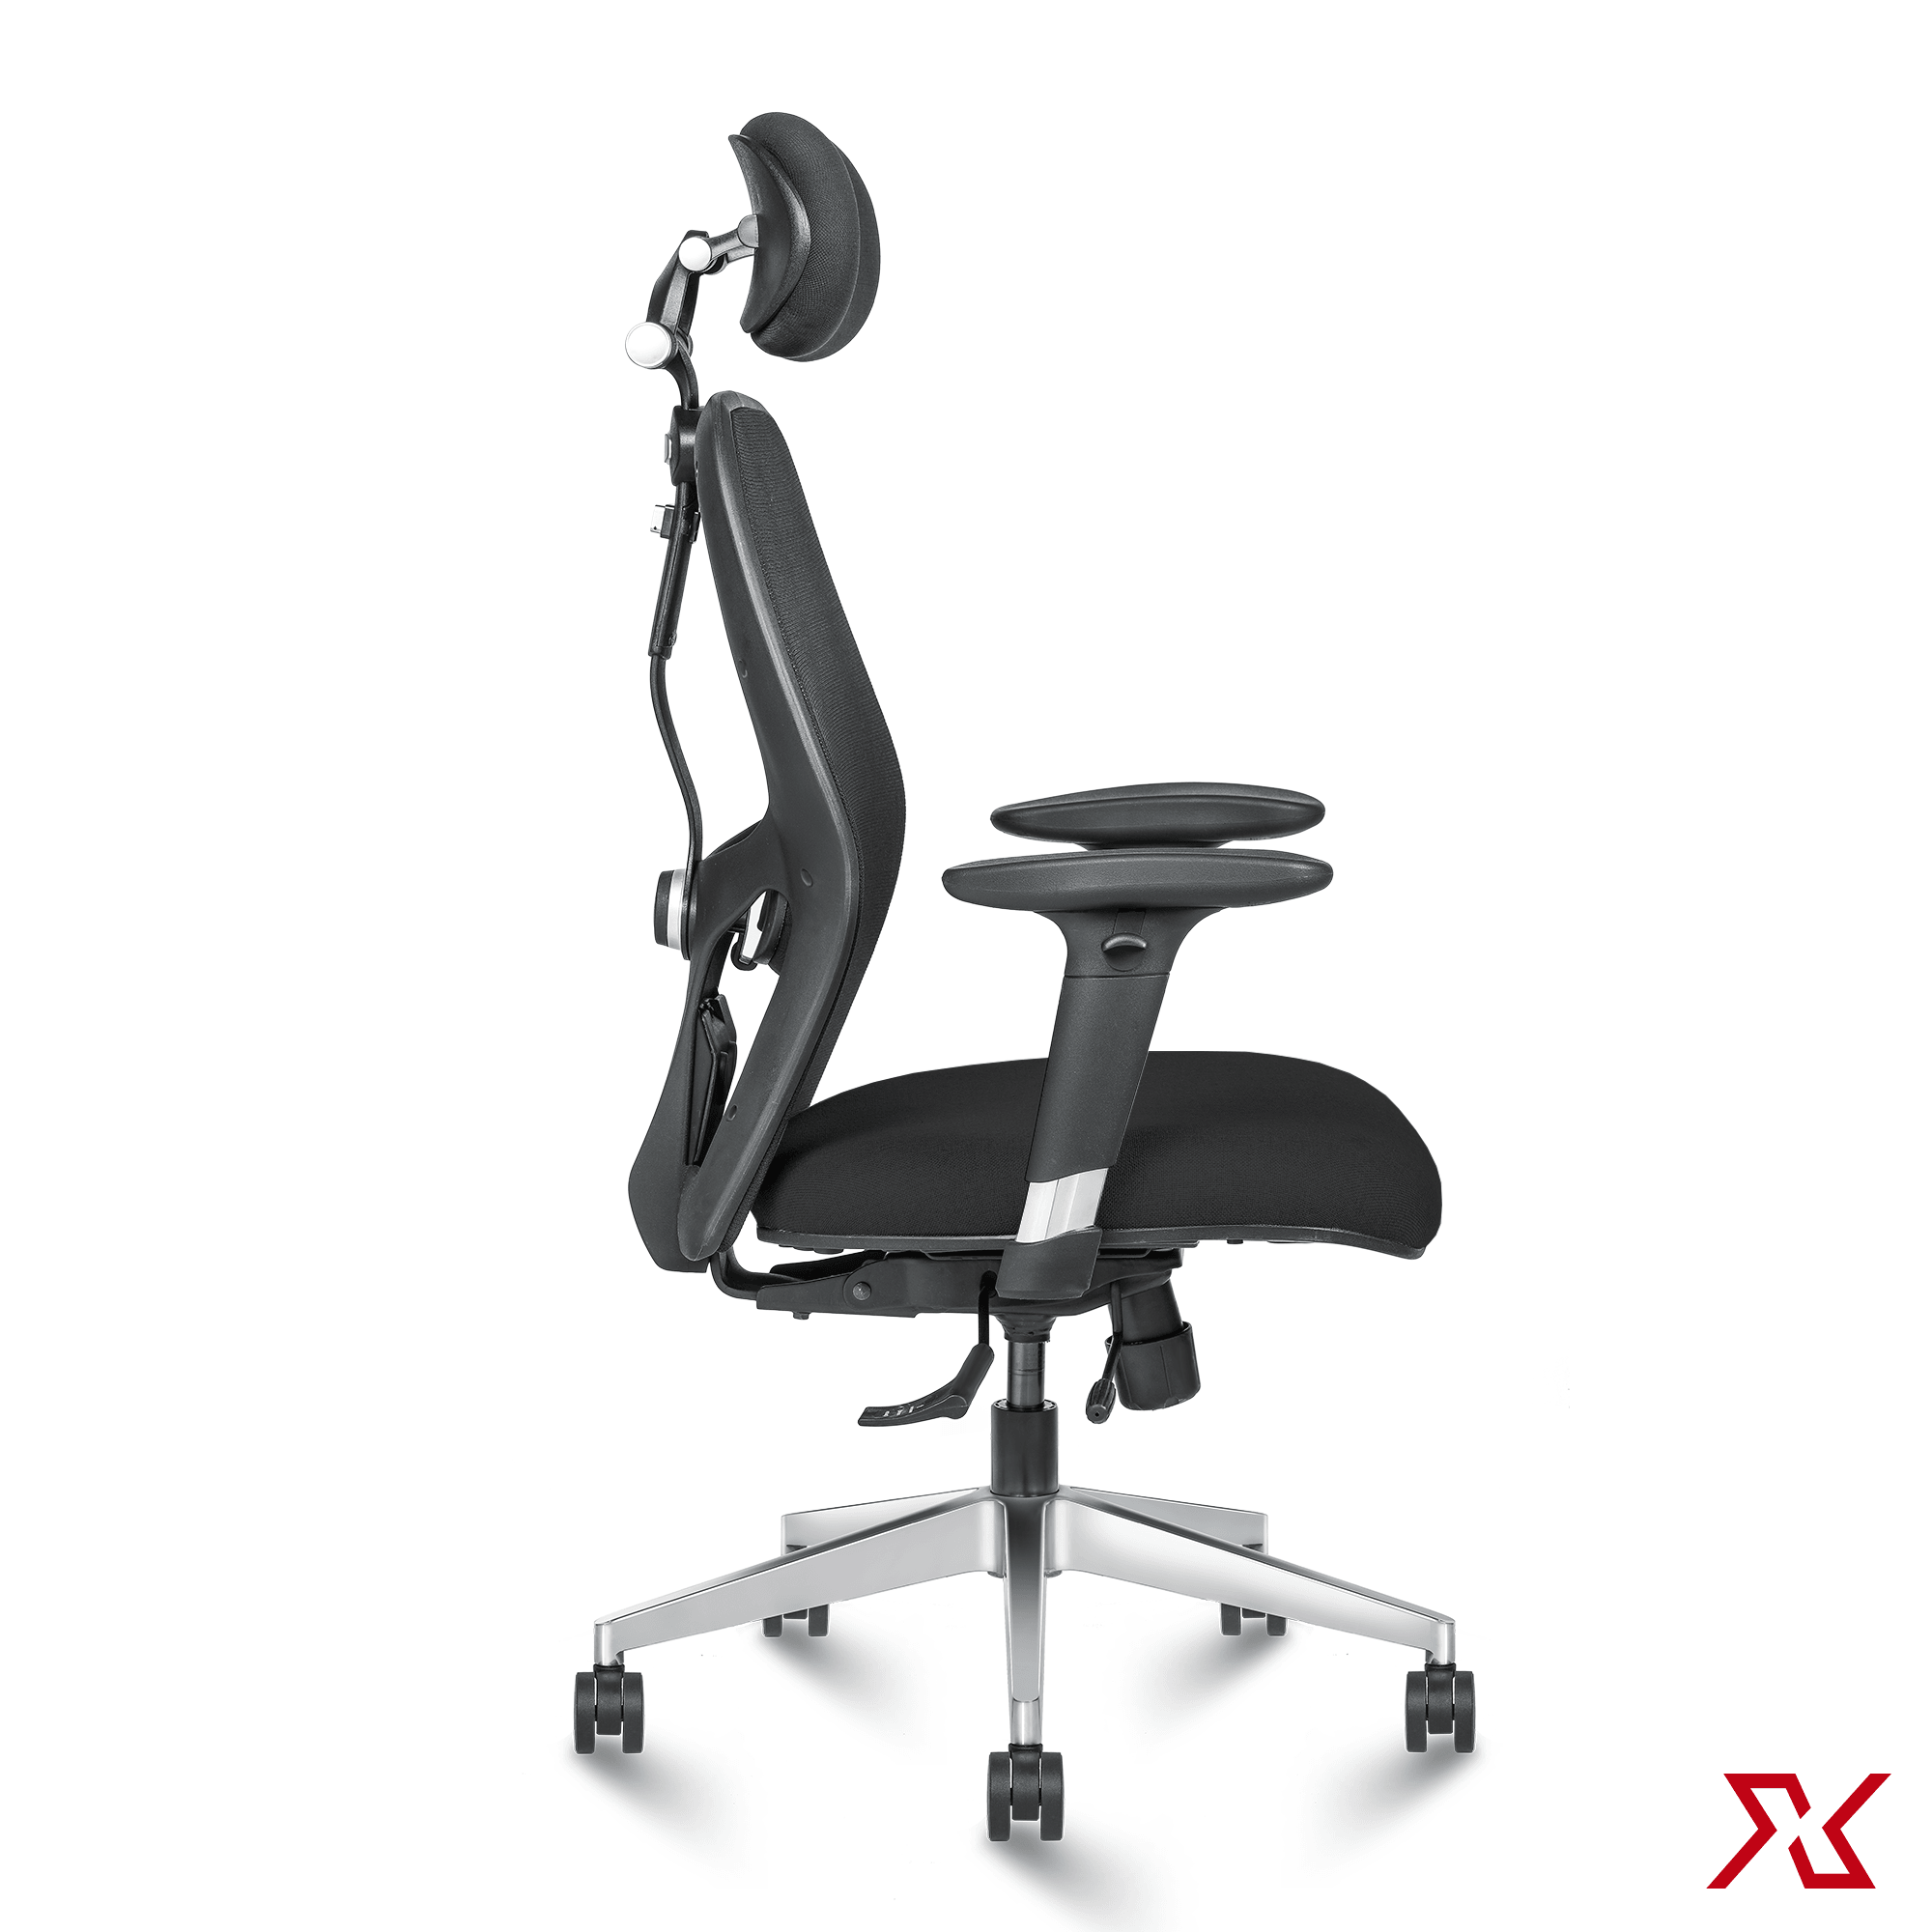 OSCAR High Back Max (Black Chair) - Exclusiff Seating Sytems